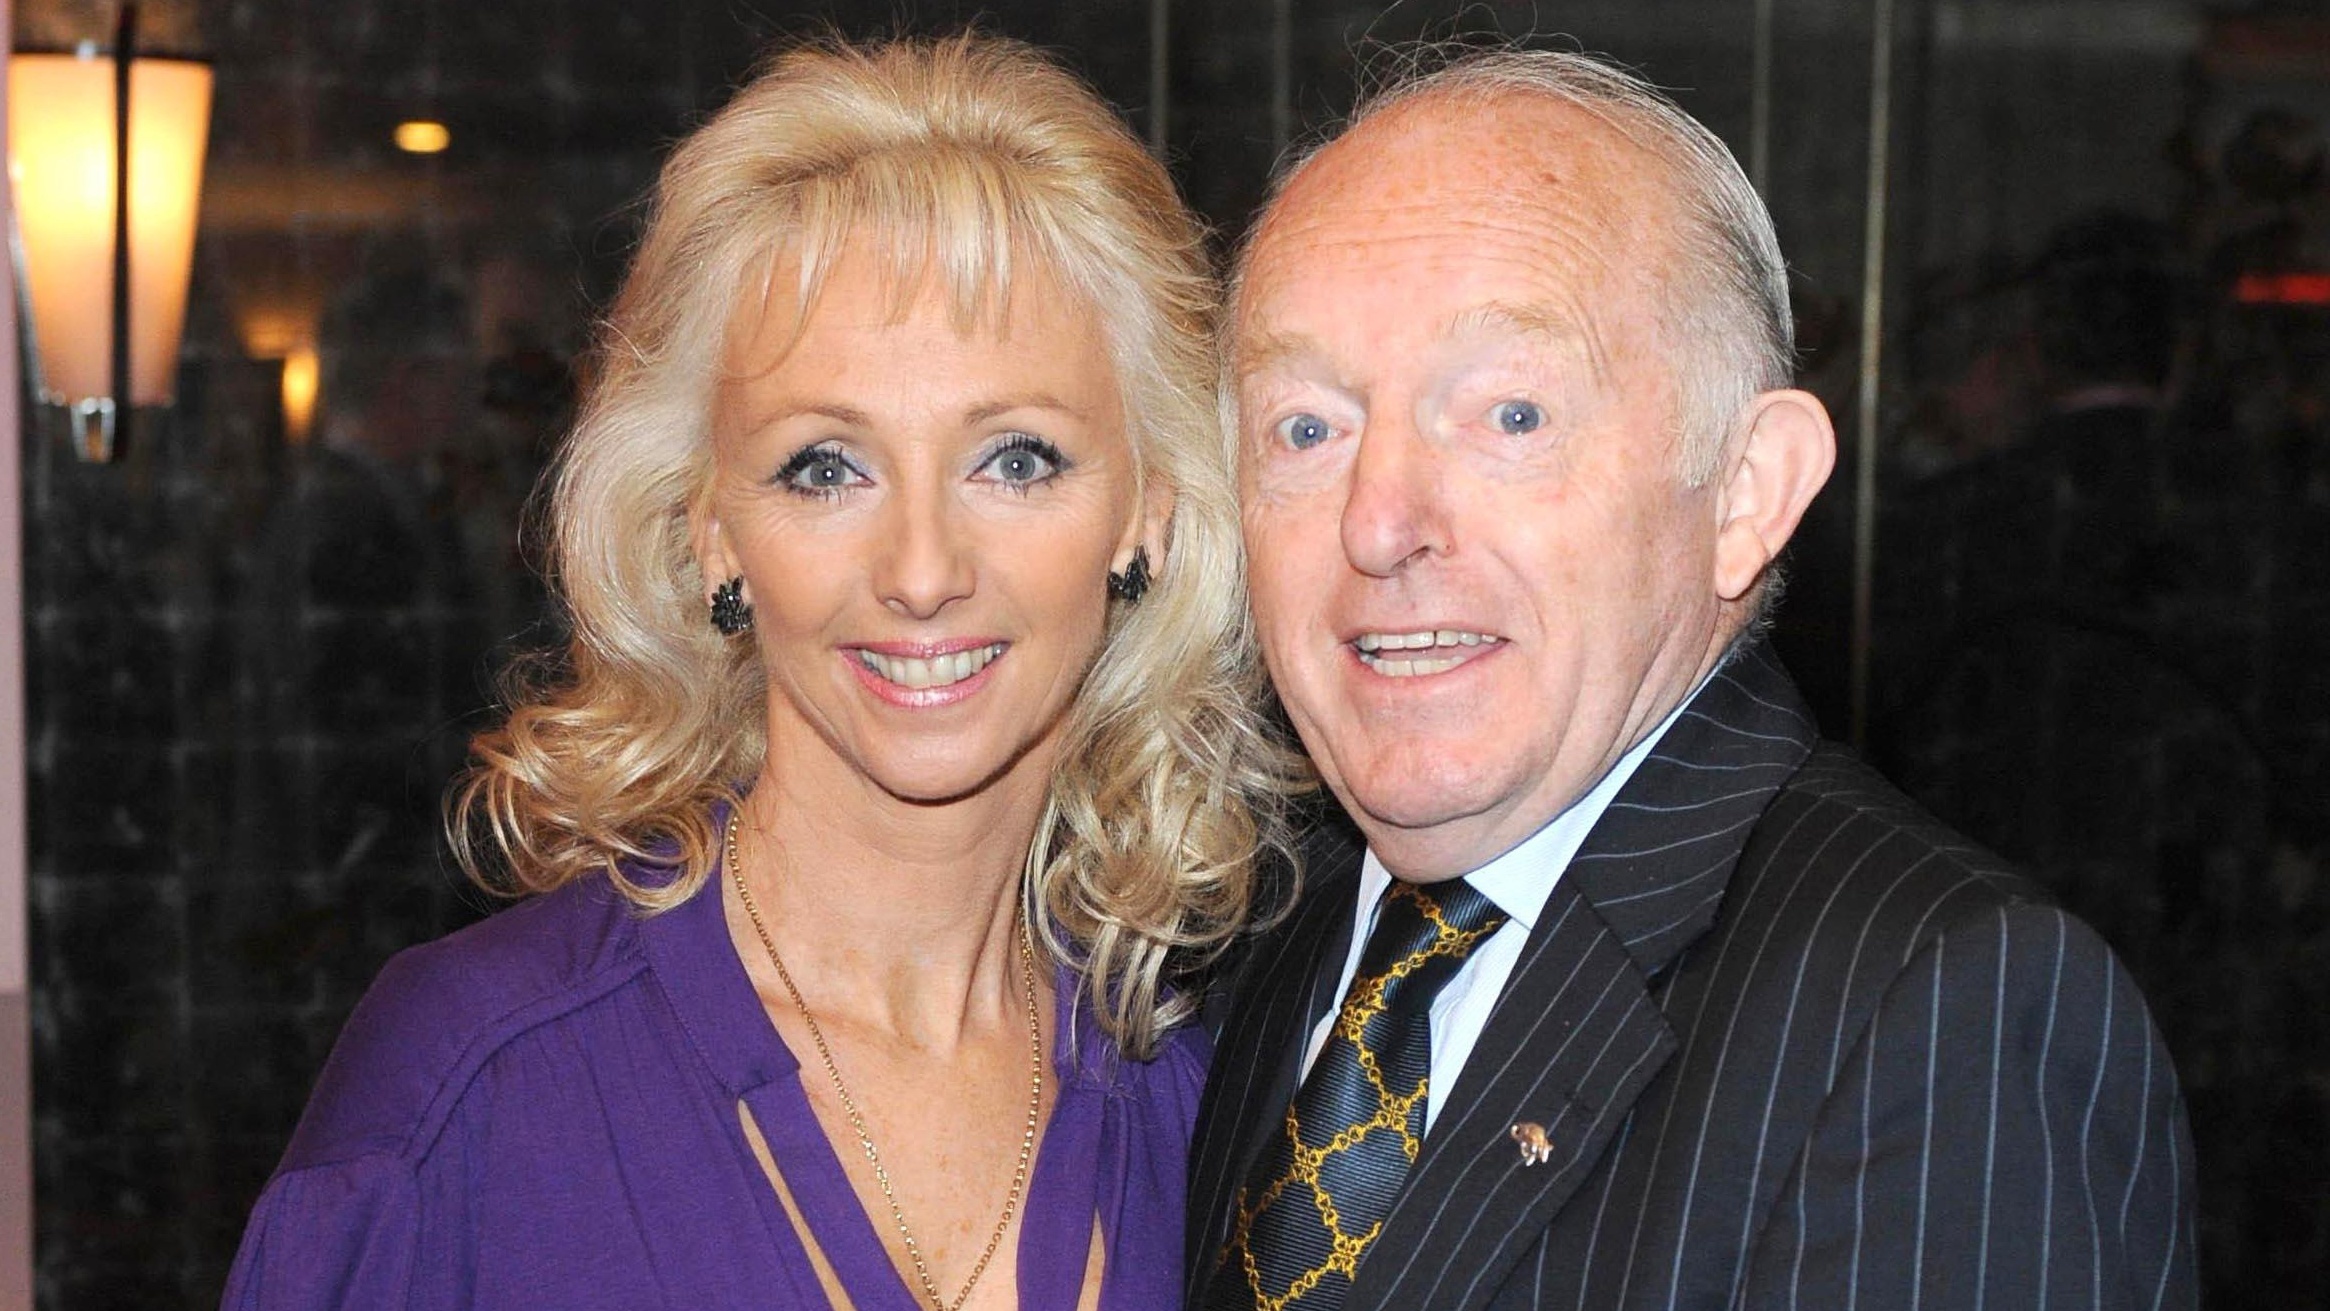 Strictly's Debbie McGee: 'Paul is looking down on me' - Sunday Post2330 x 1311